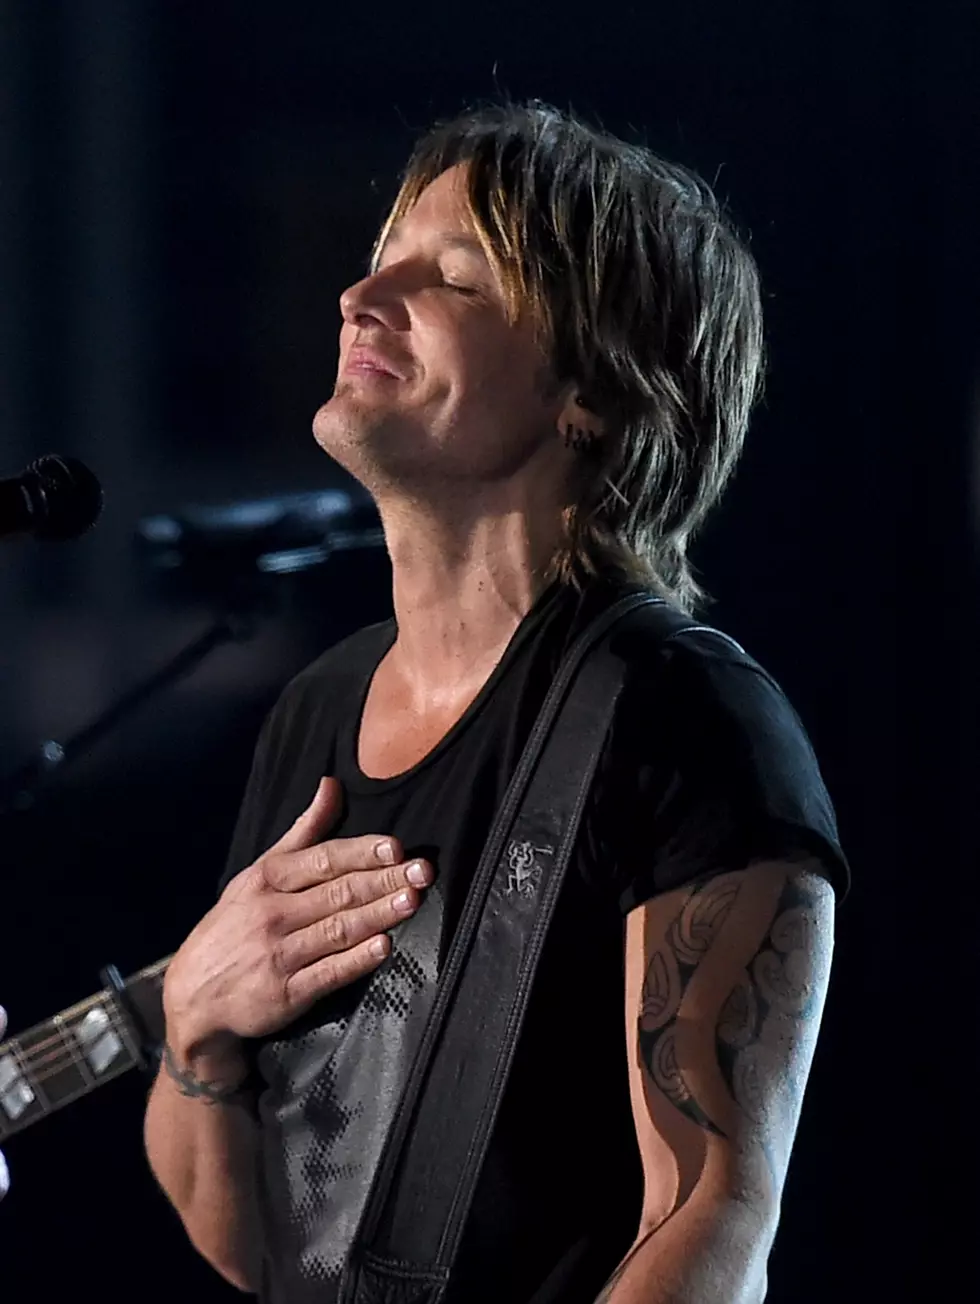 Watch: Keith Urban’s Video for New Song “Come Back to Me”